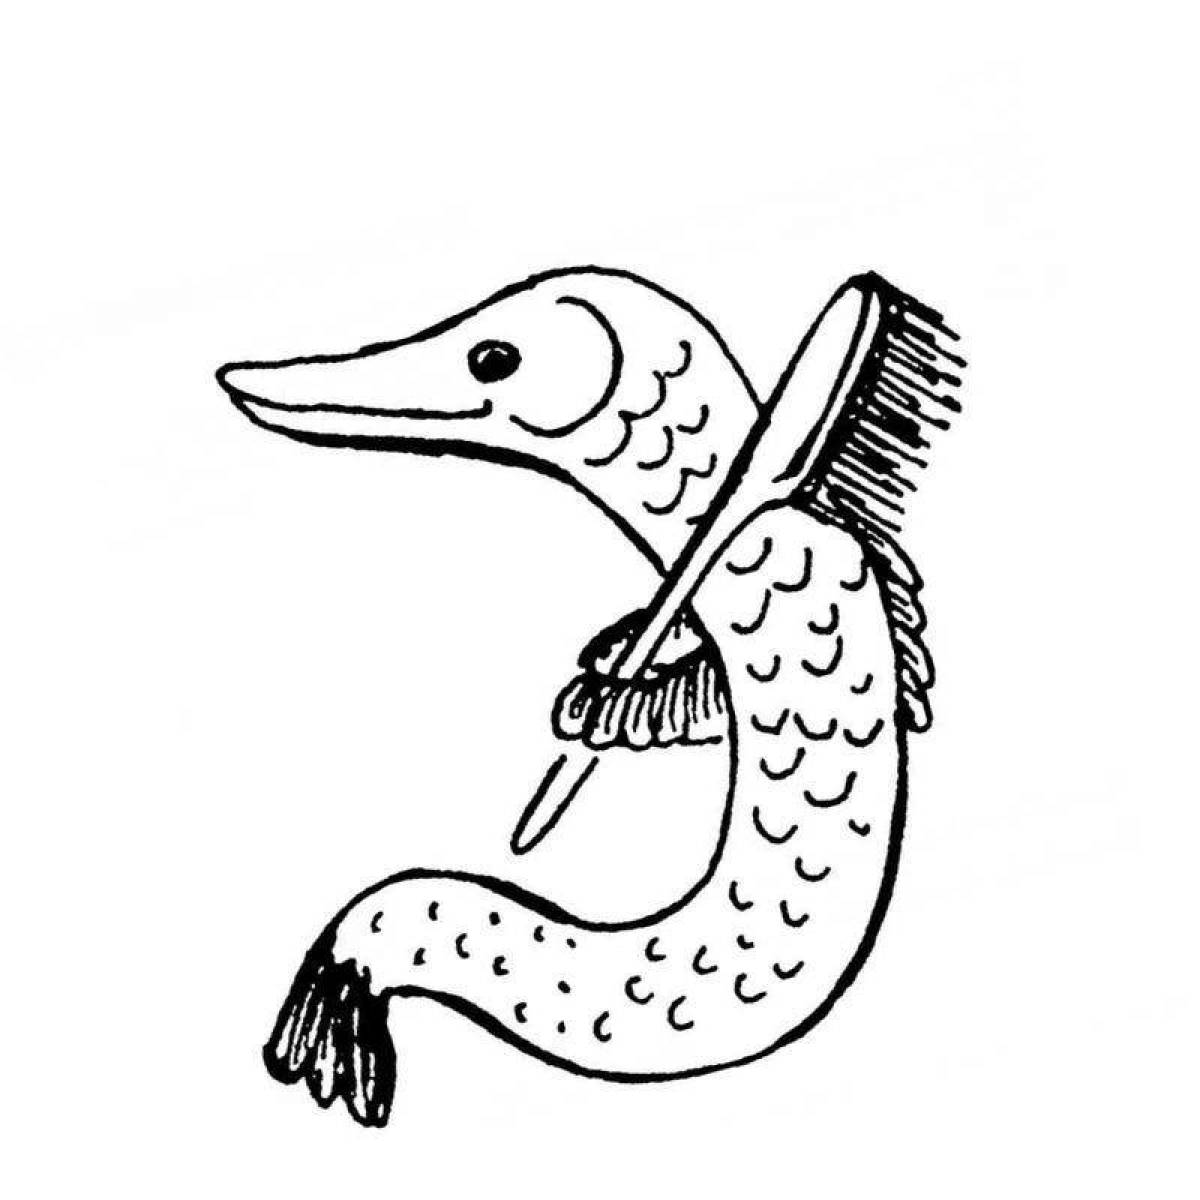 Amazing pike coloring page for kids